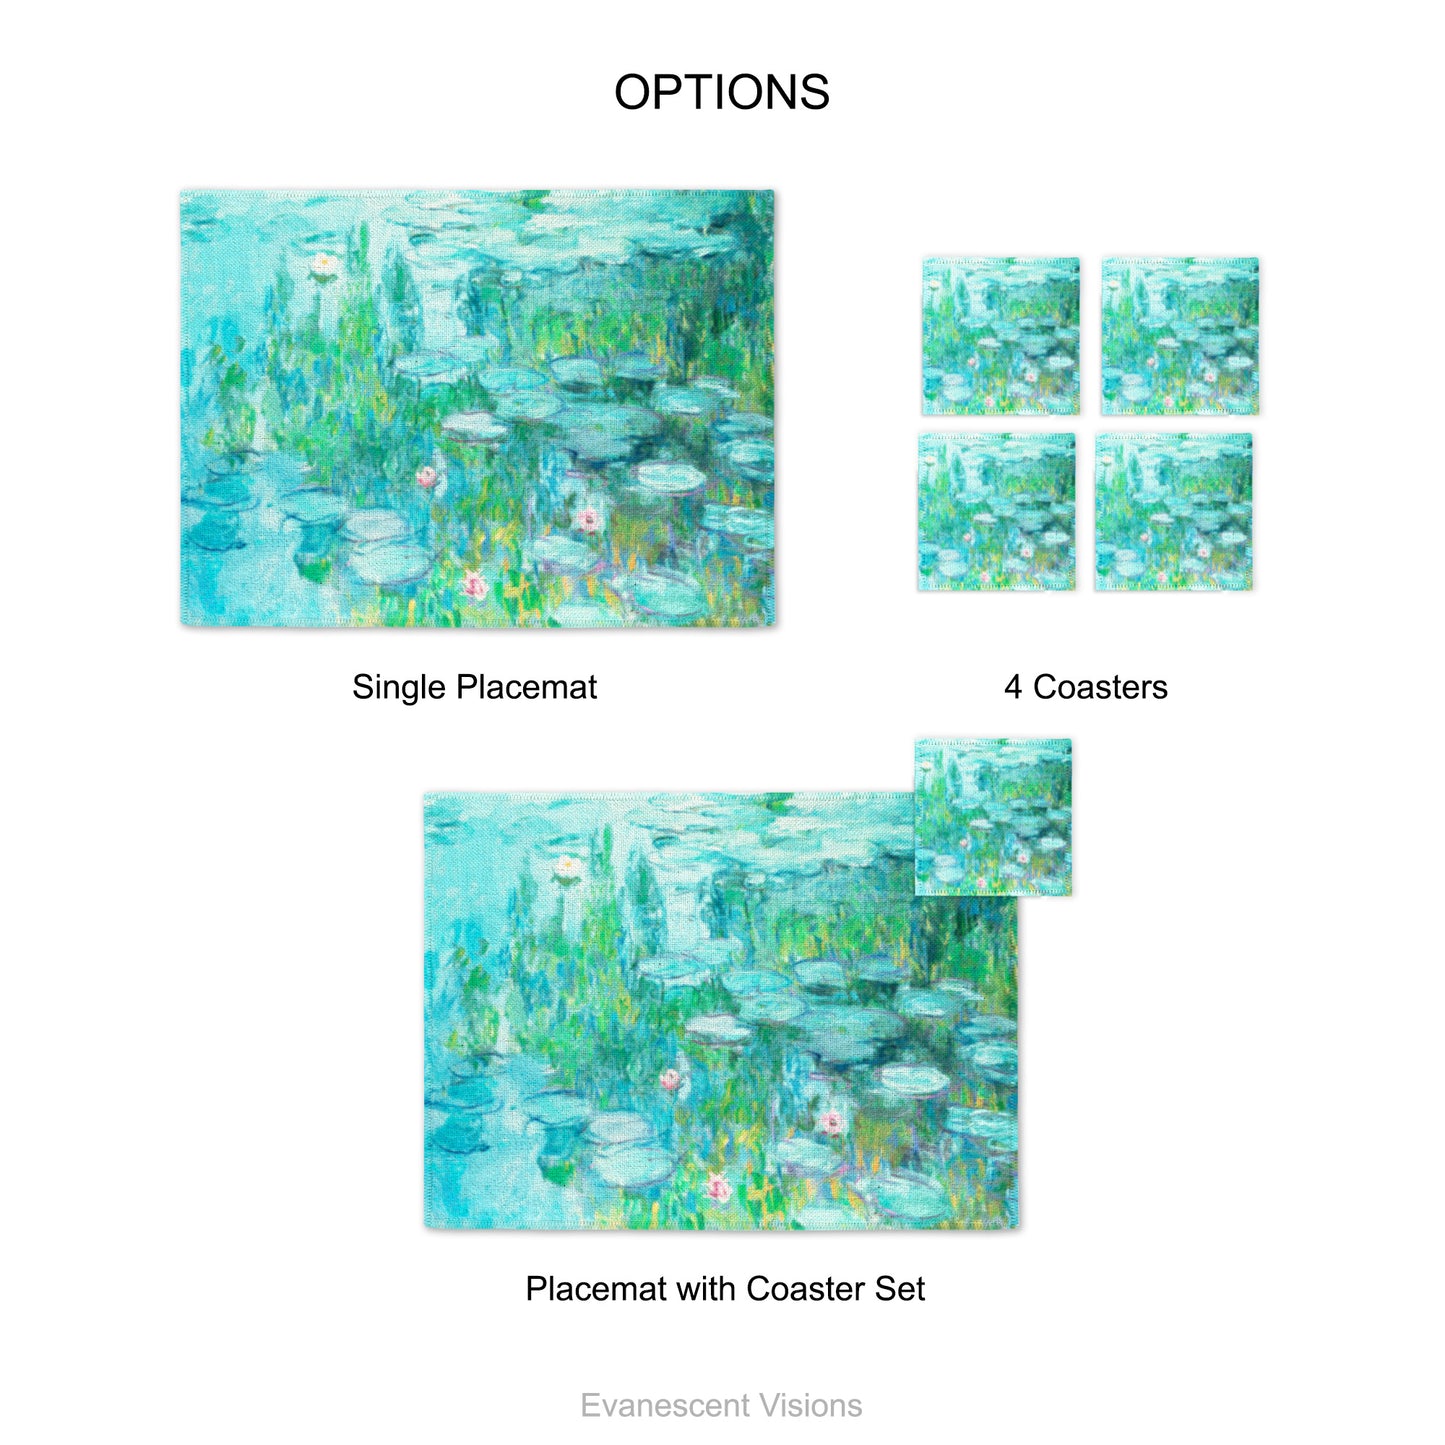 Placemat and coaster with design based on artwork, 'Water Lilies' circa 1915 by Claude Monet. Product options shows single placemat, set of 4 coasters and placemat with coaster set. 